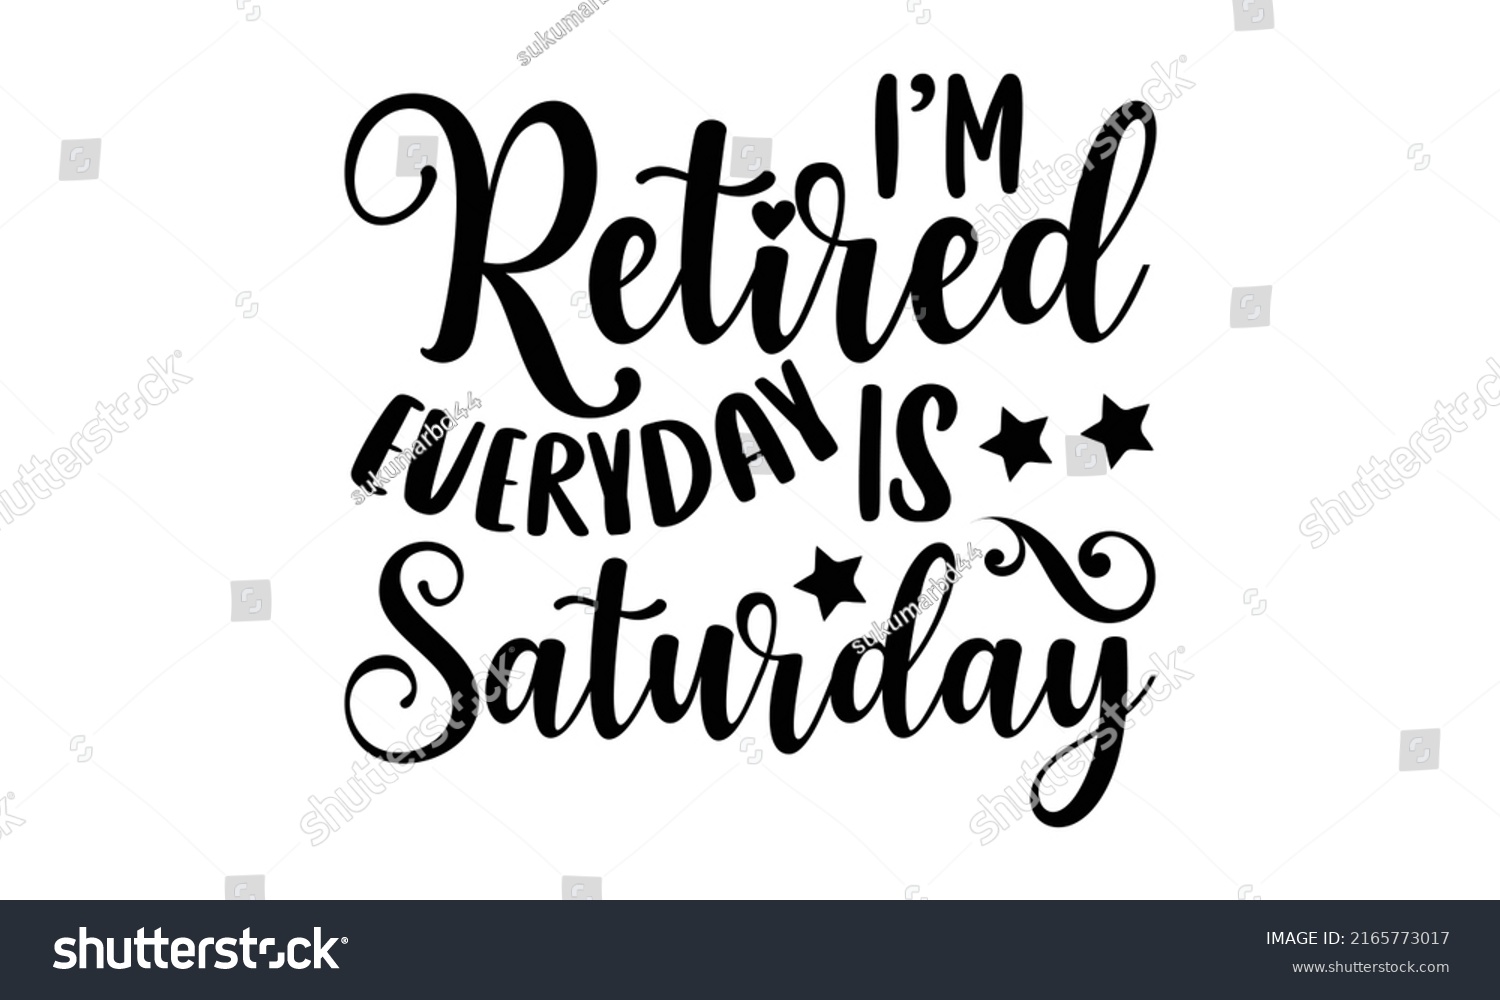 SVG of I’m Retired Everyday Is Saturday - Retirement t shirt design, Hand drawn lettering phrase, Calligraphy graphic design, SVG Files for Cutting Cricut and Silhouette svg